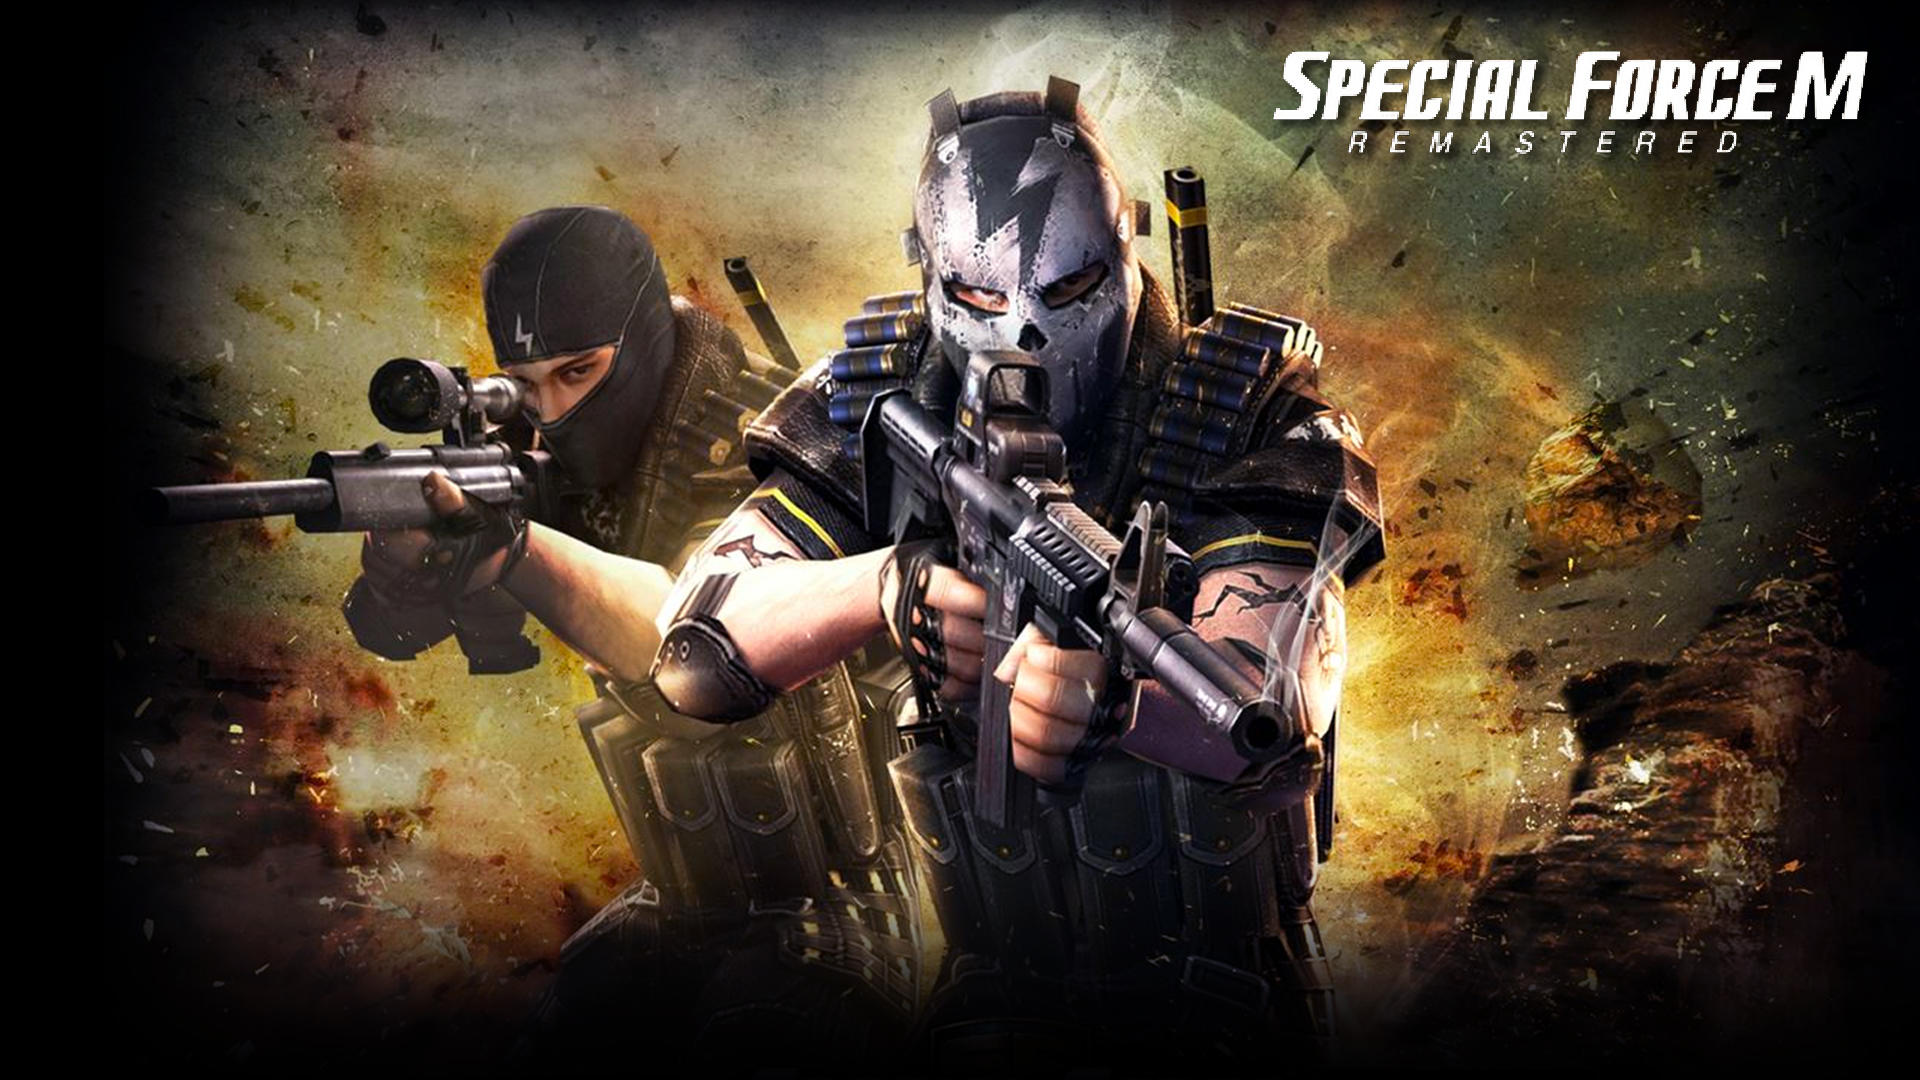 Banner of SFM (Special Force M Remaster 0.1.16